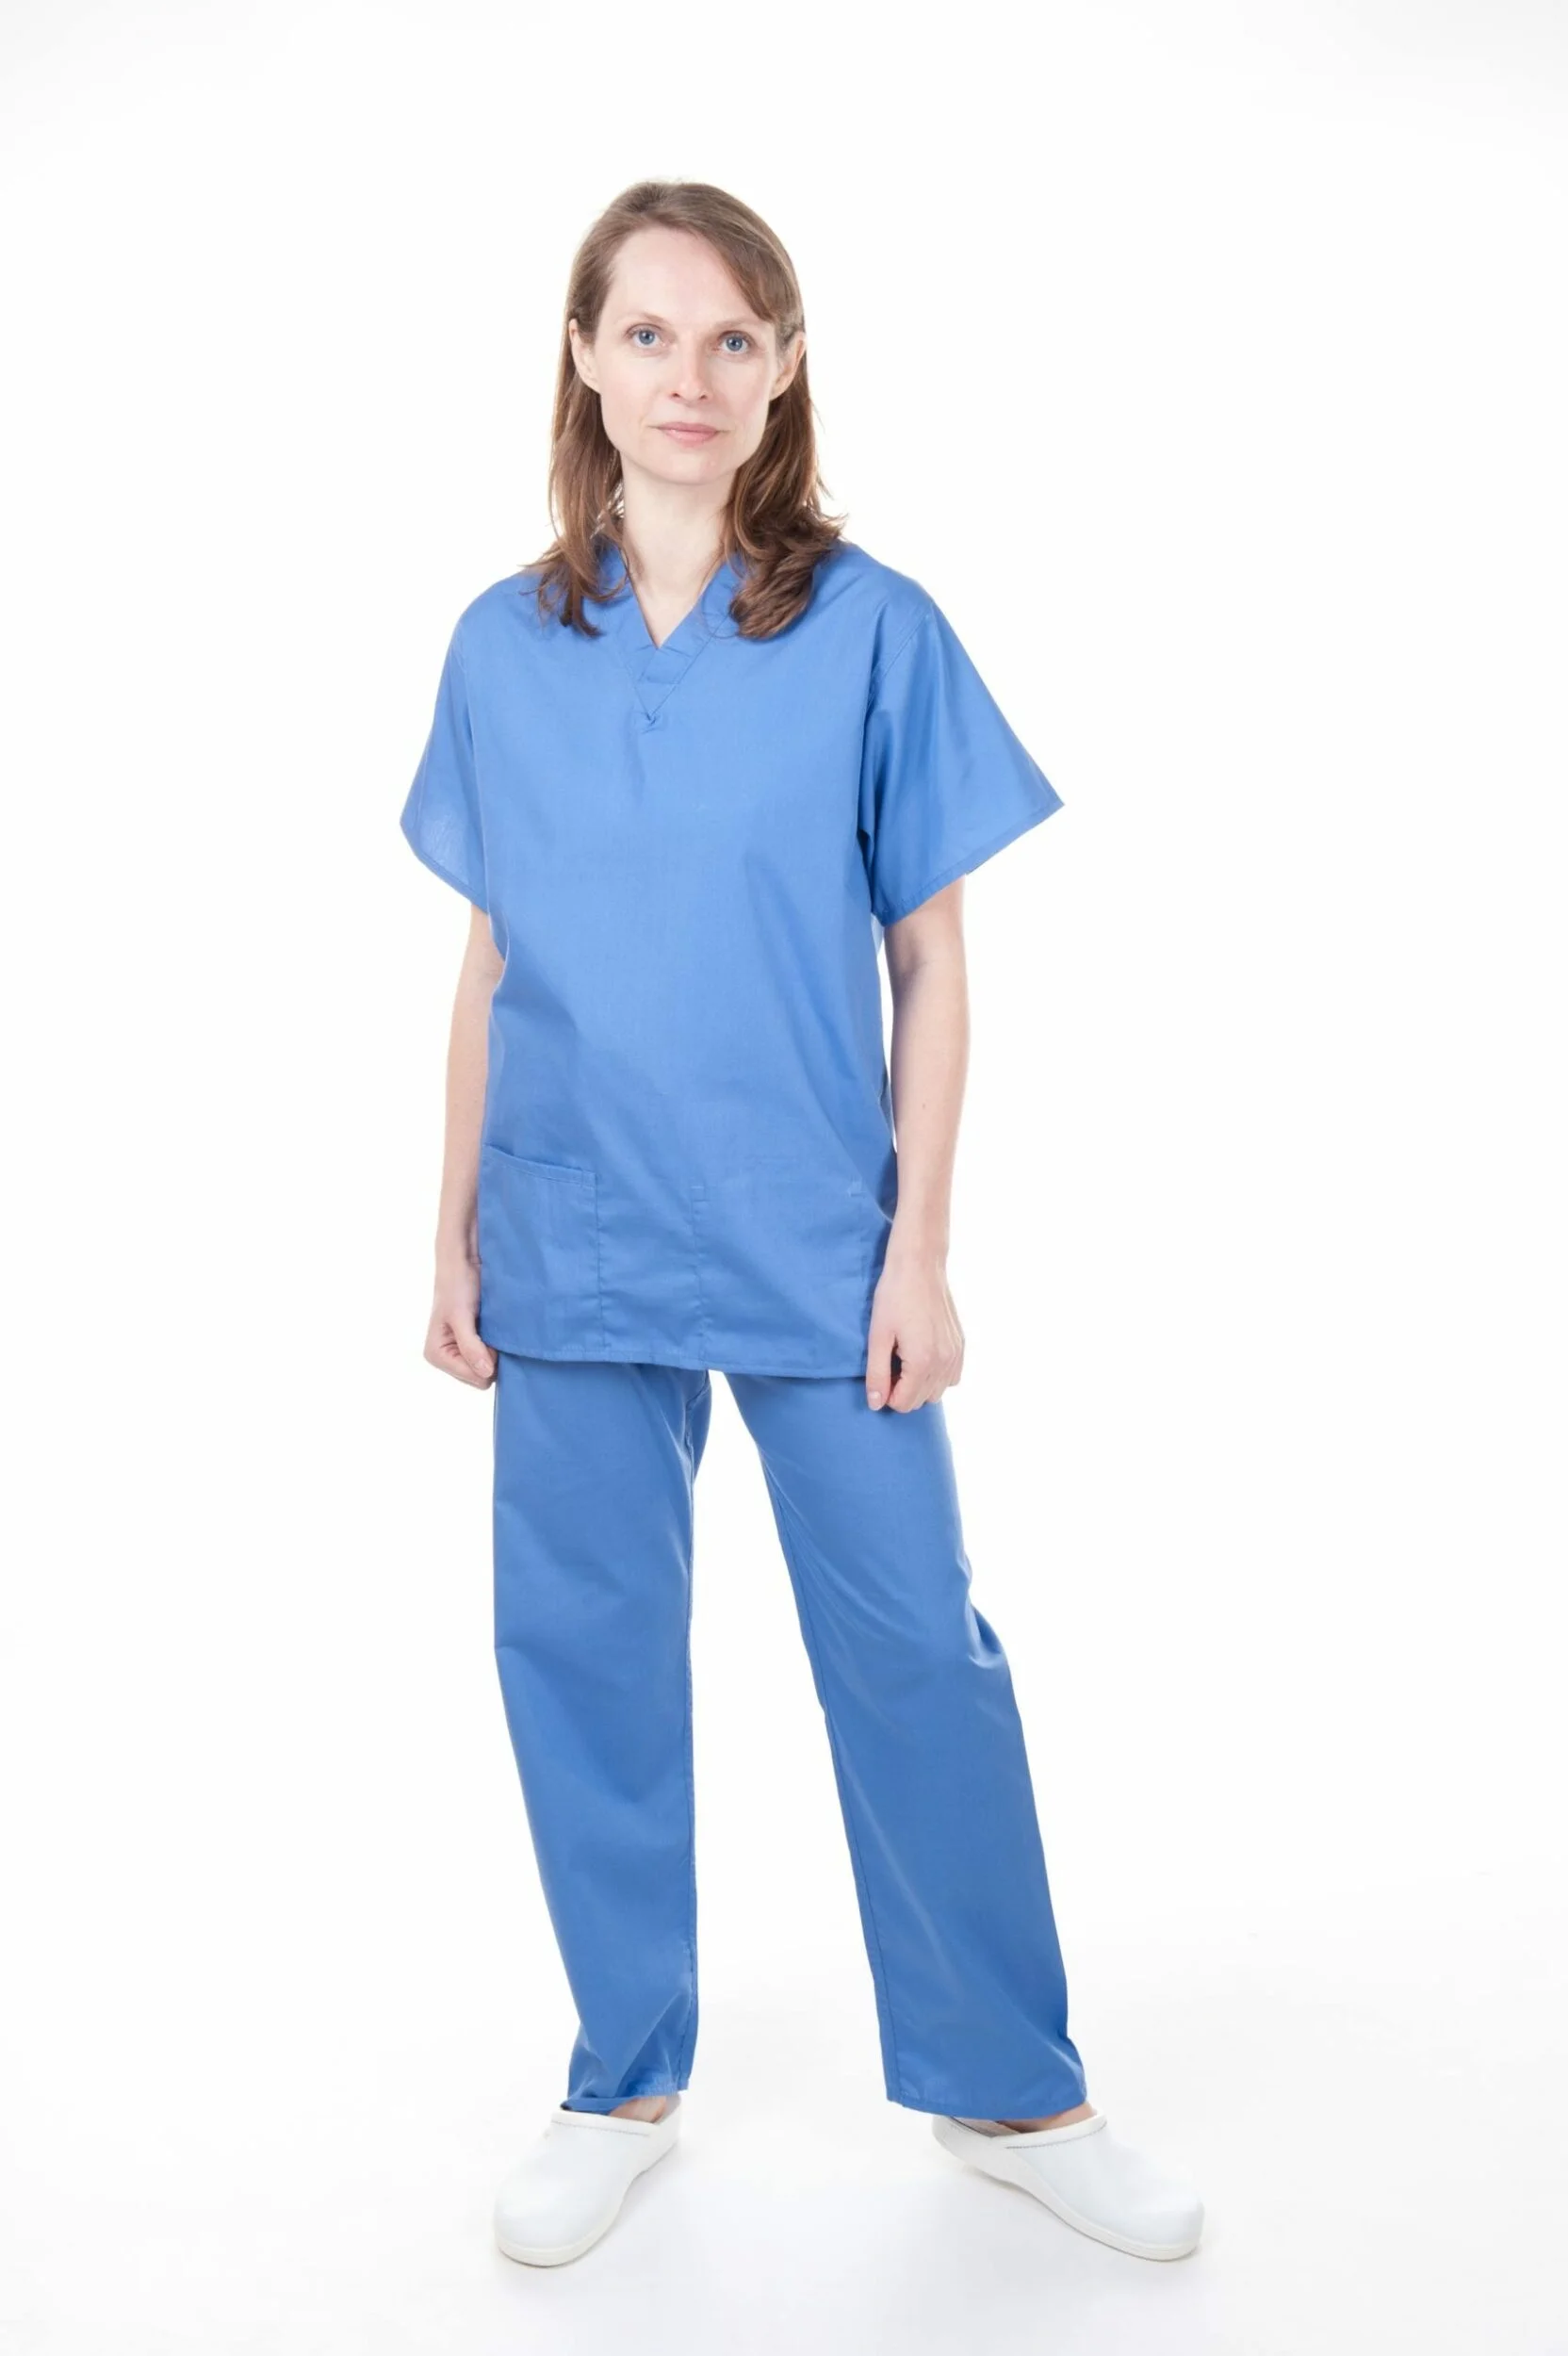 Medical uniforms are available from AWB Textiles in the UK